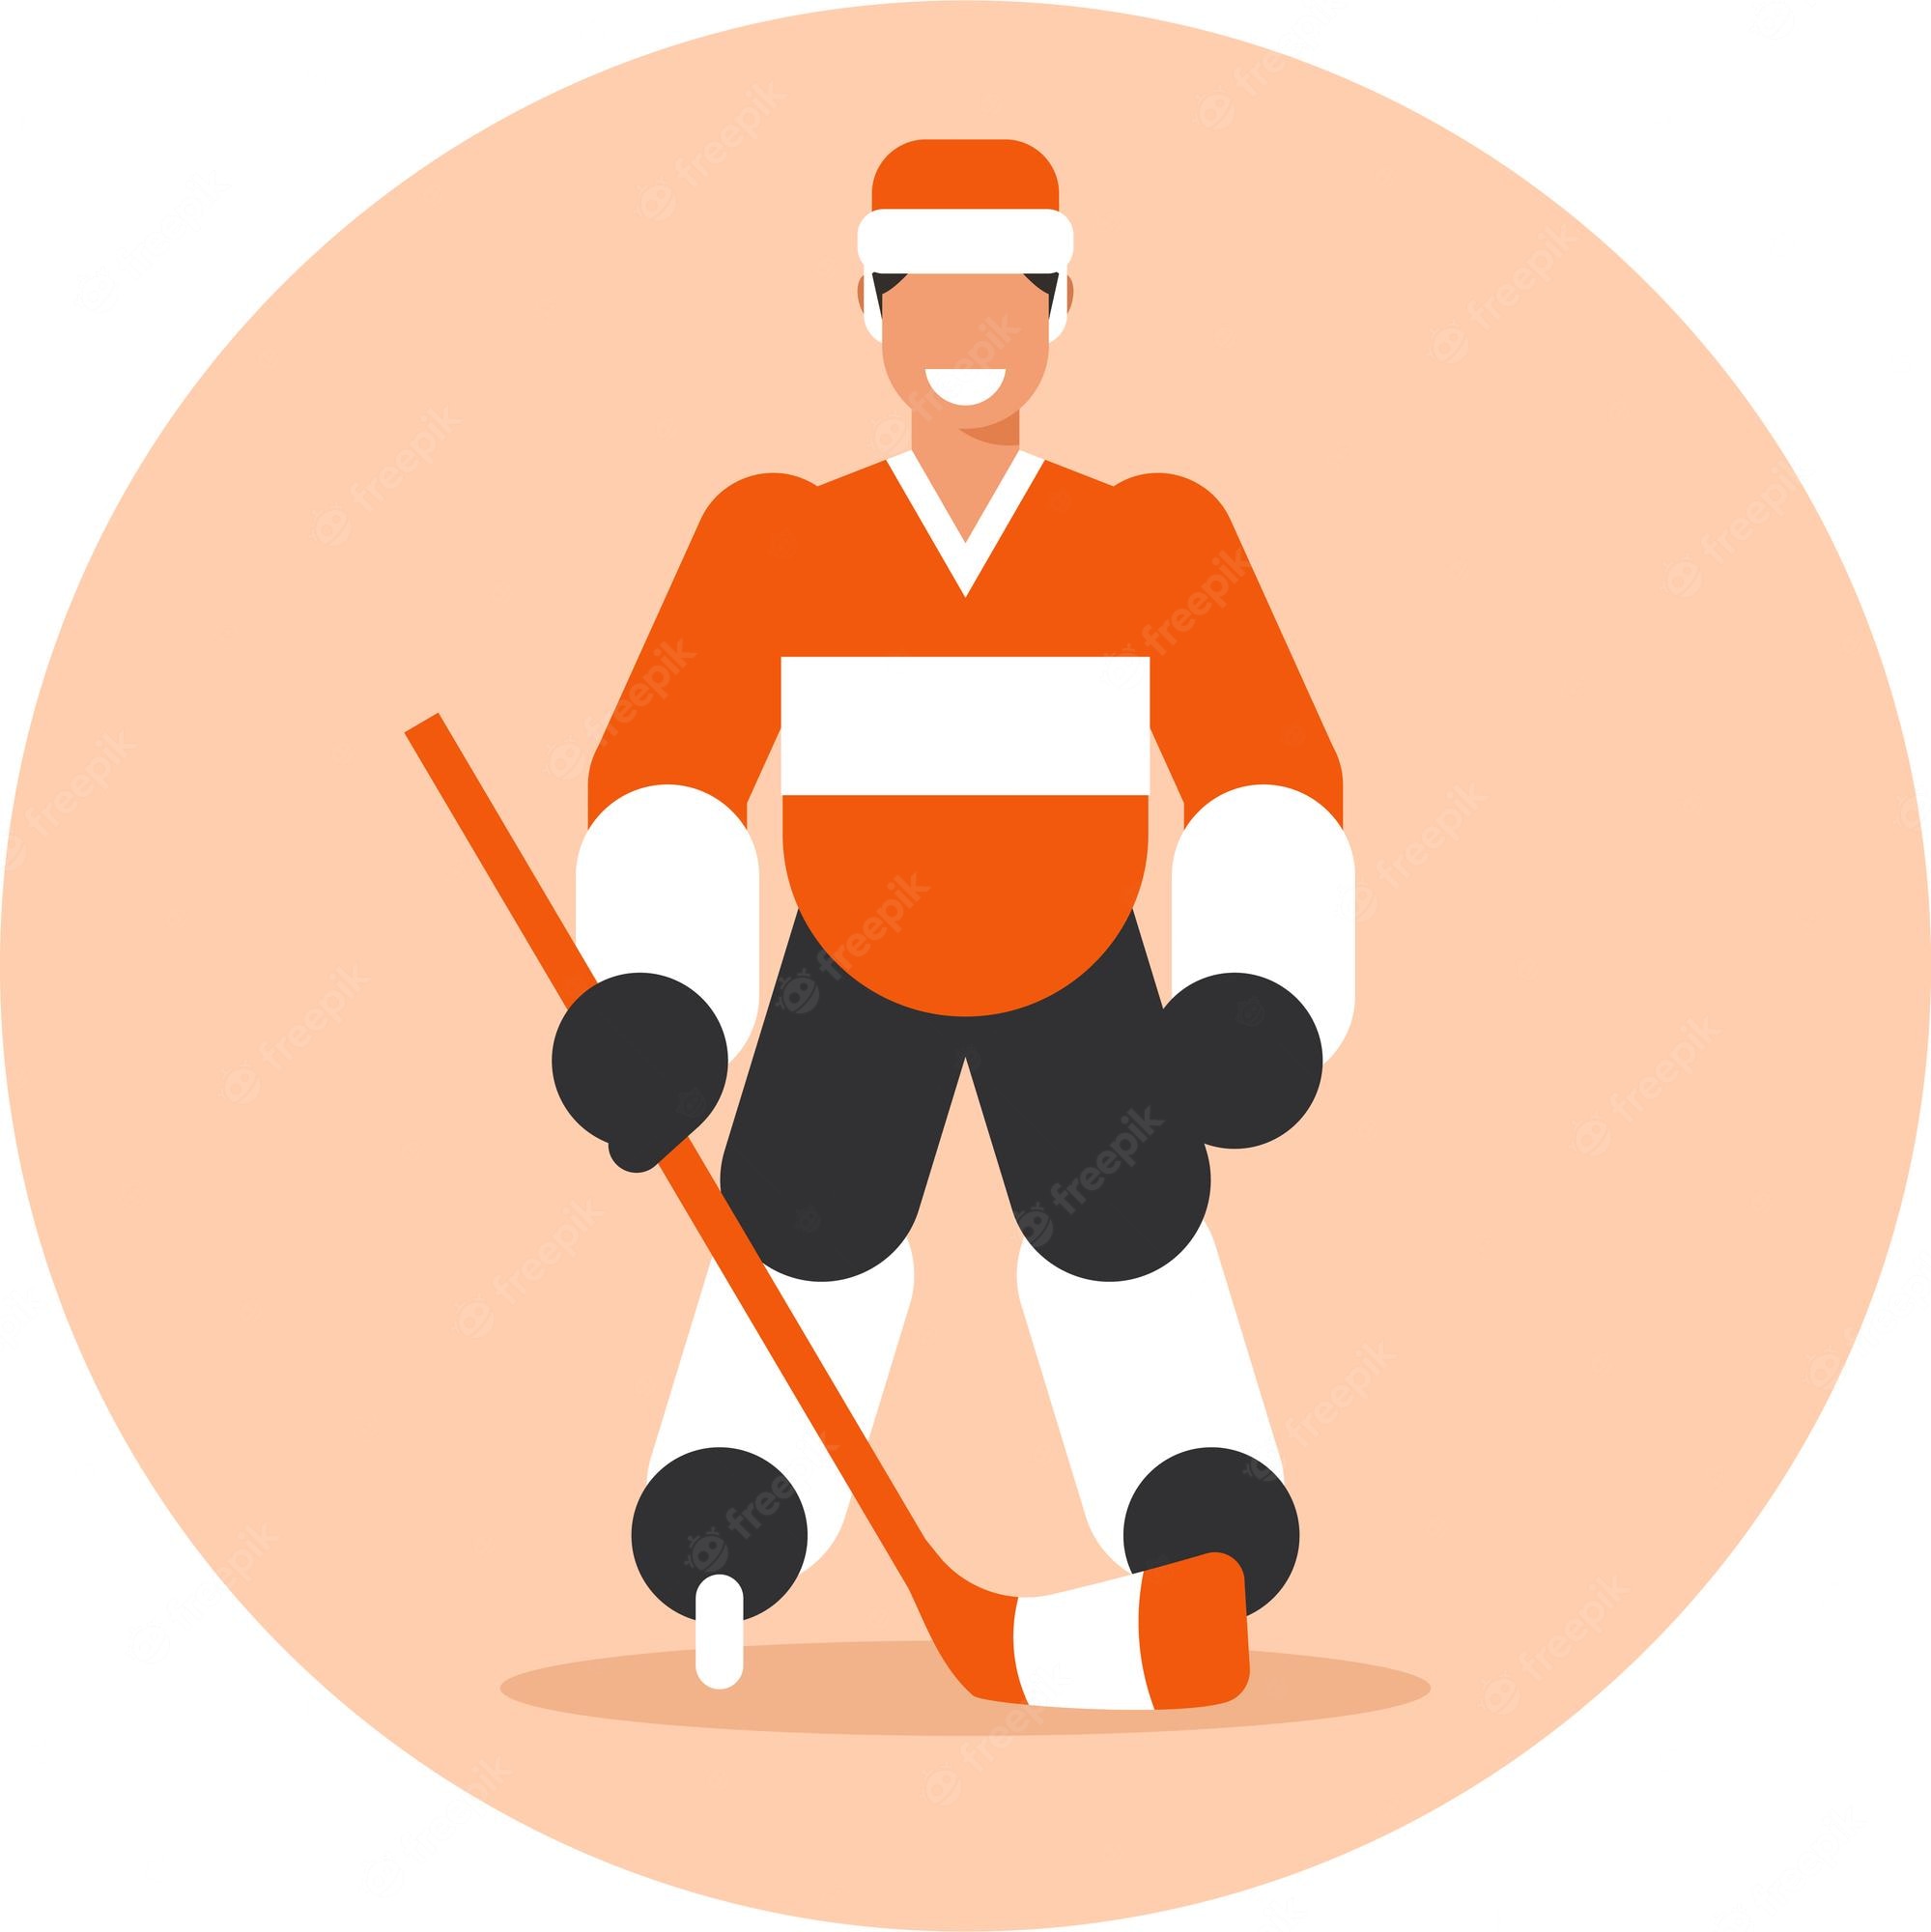 Hockey Clip Art Images Free, Clipart Panda - Free Clipart Images